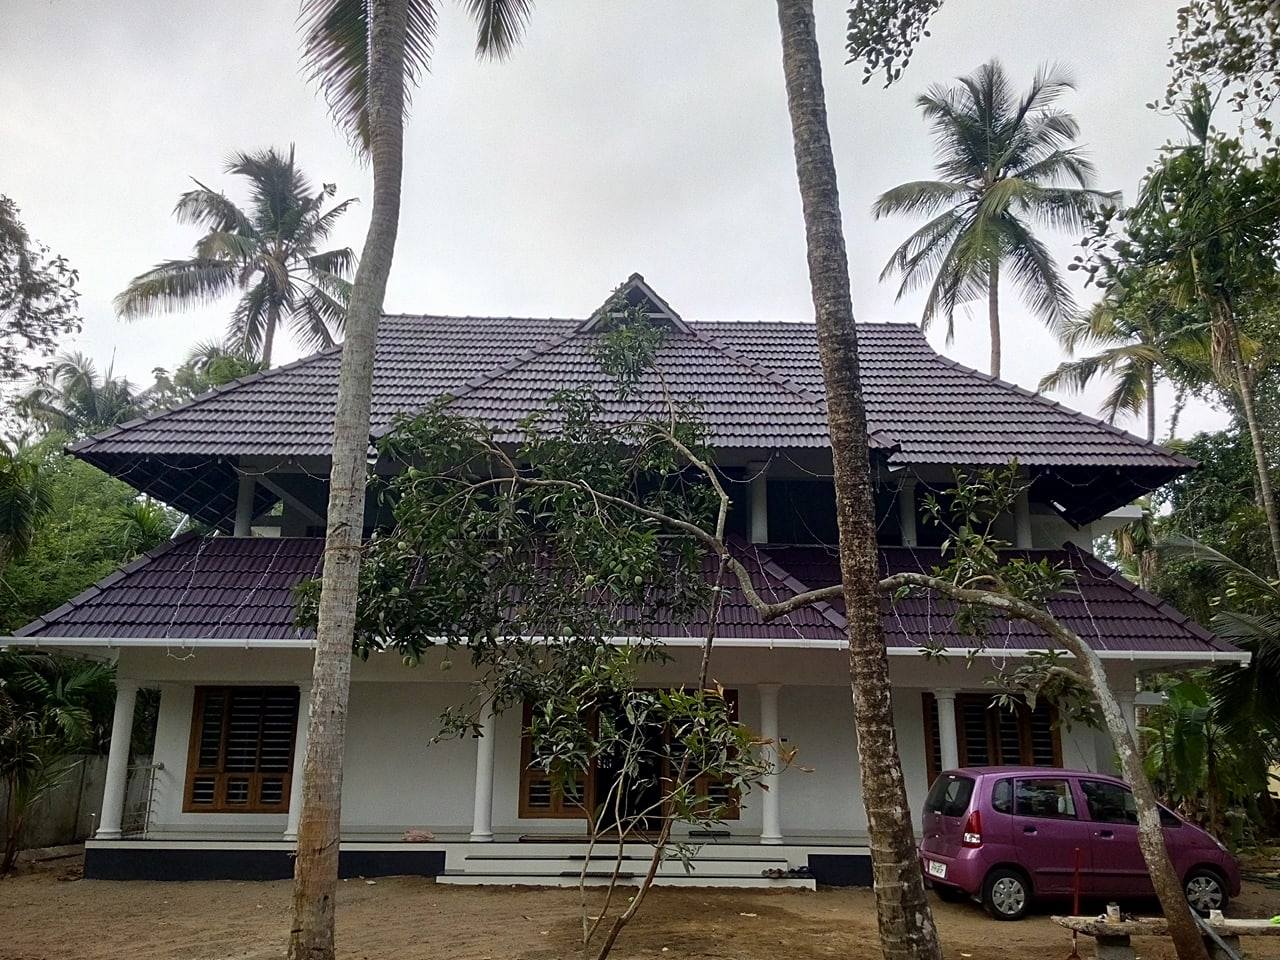 2232 Square Feet 4 Bedroom Double Floor Traditional Style Kerala Home Design and Plan